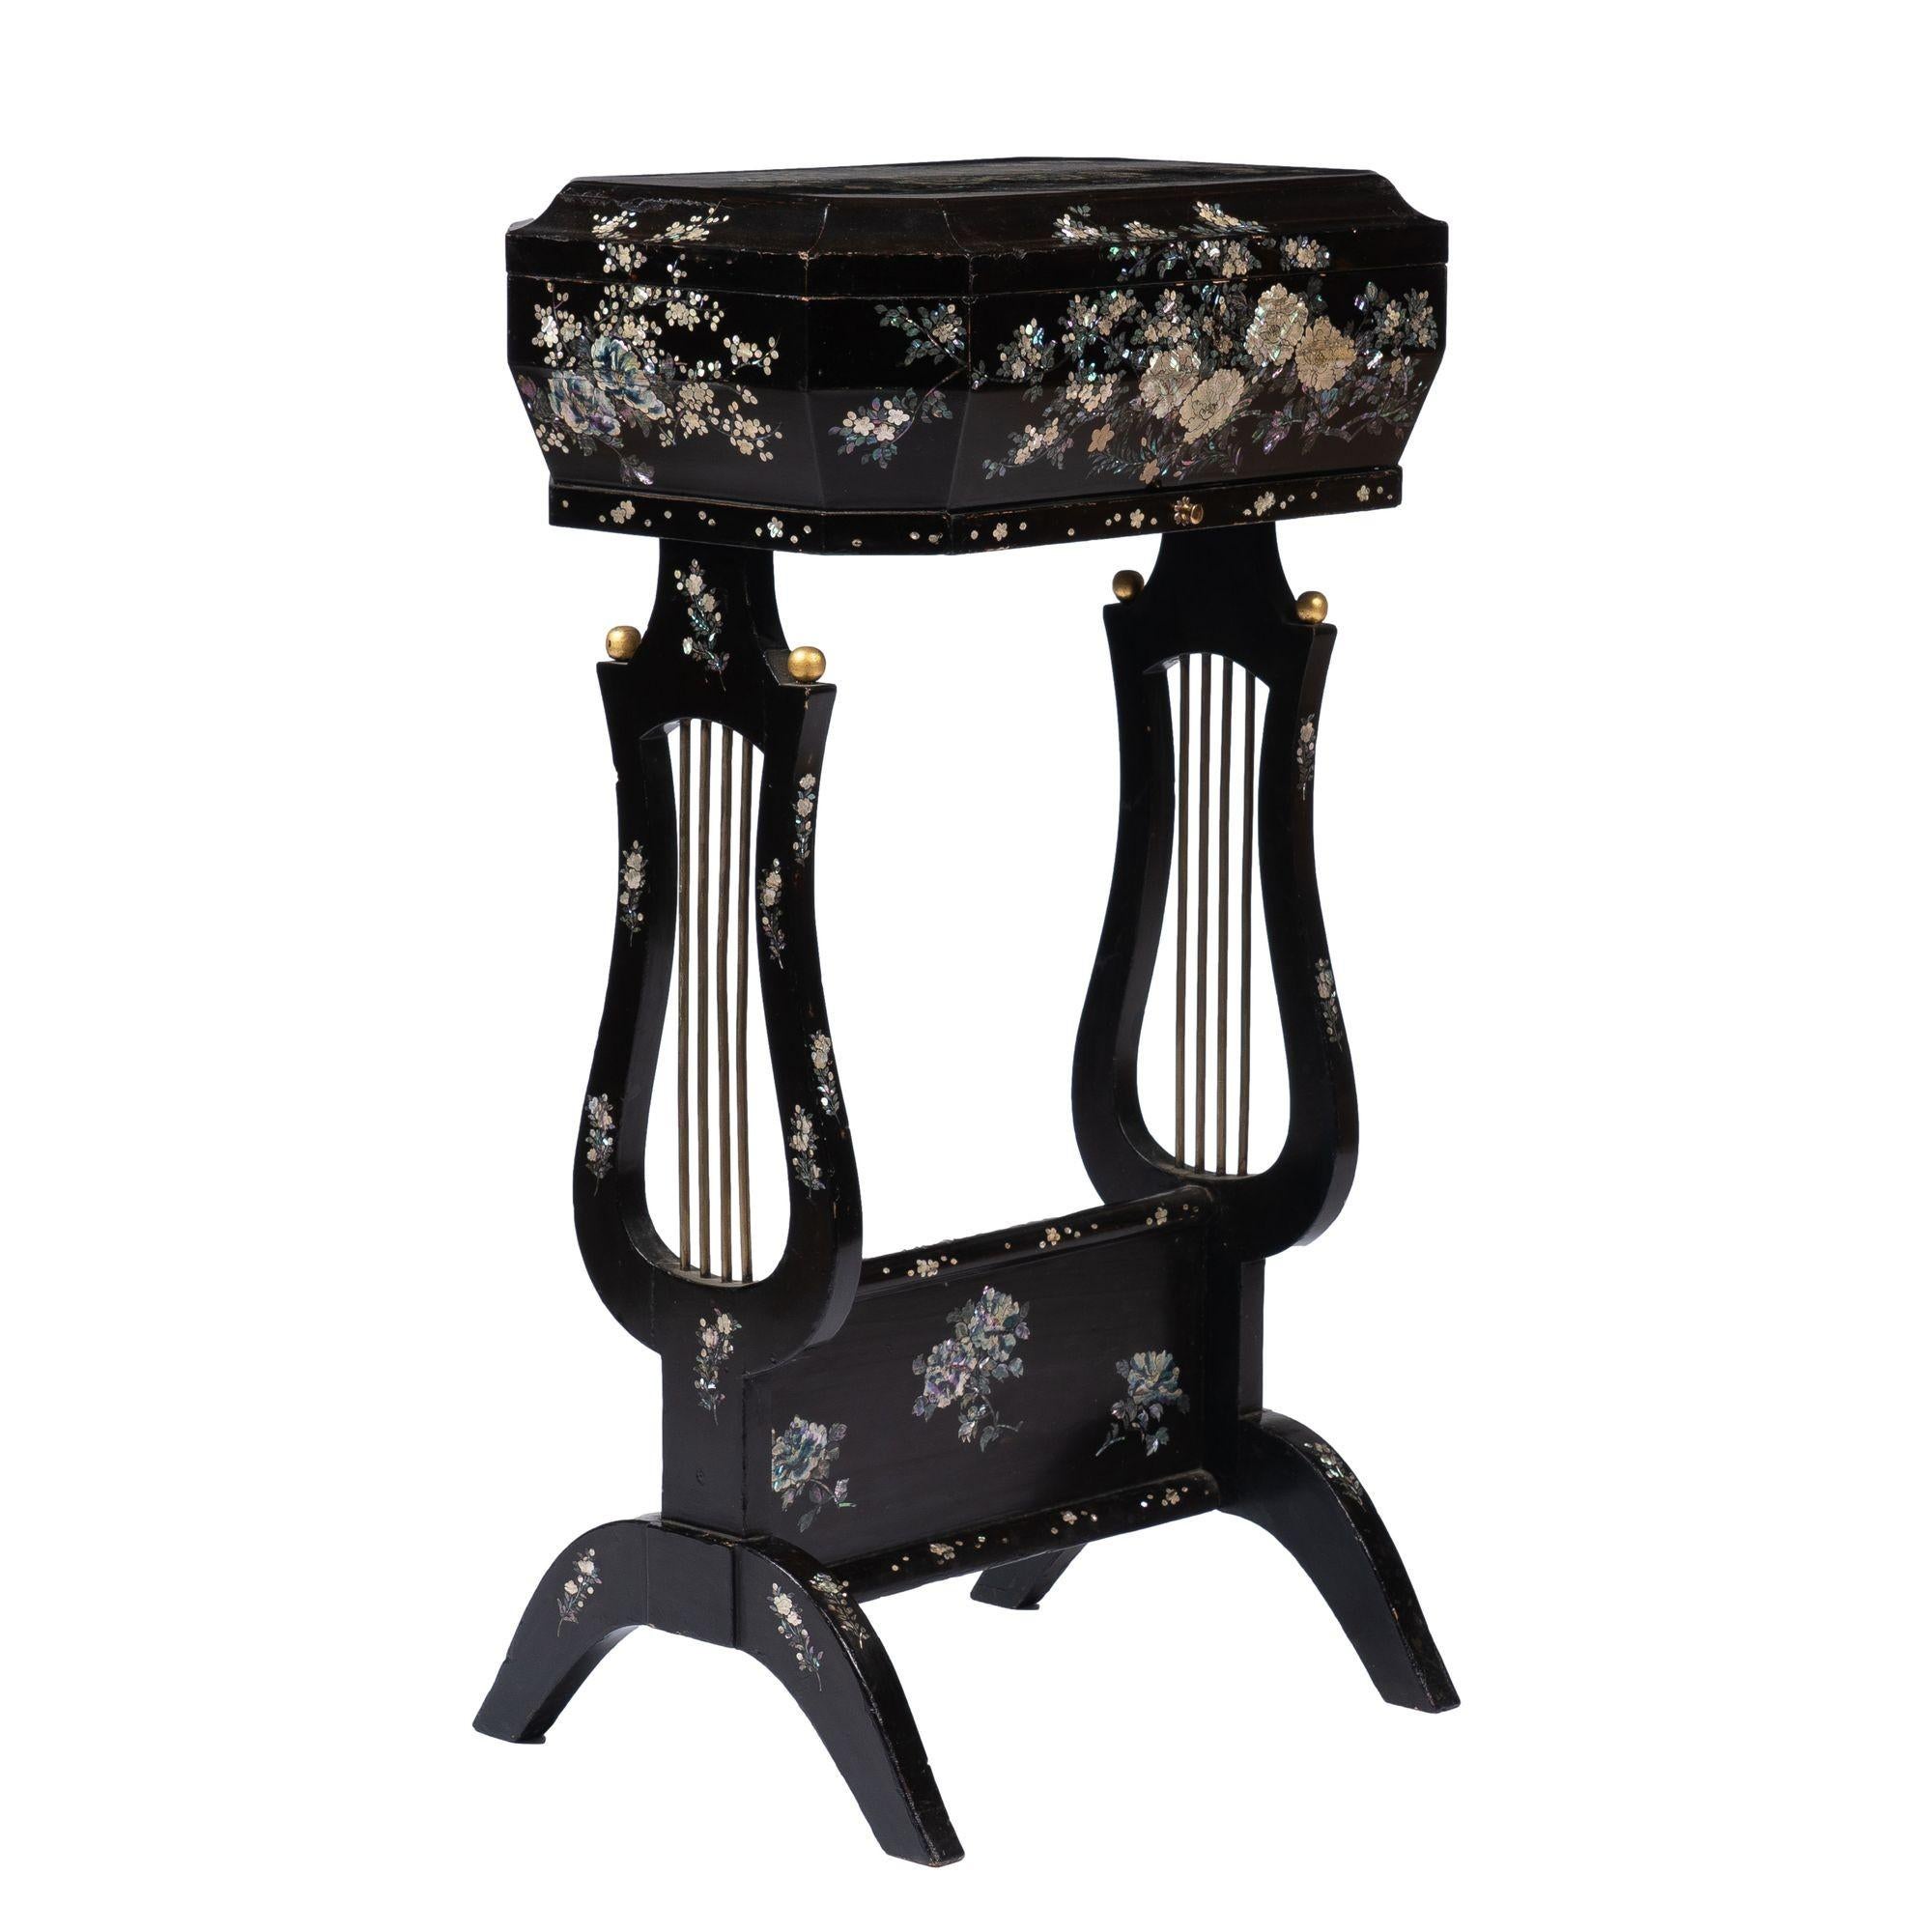 Abalone Japanese Lyre Base Sewing Box on Stand with Mother-Of Pearl Inlays, c. 1880 For Sale